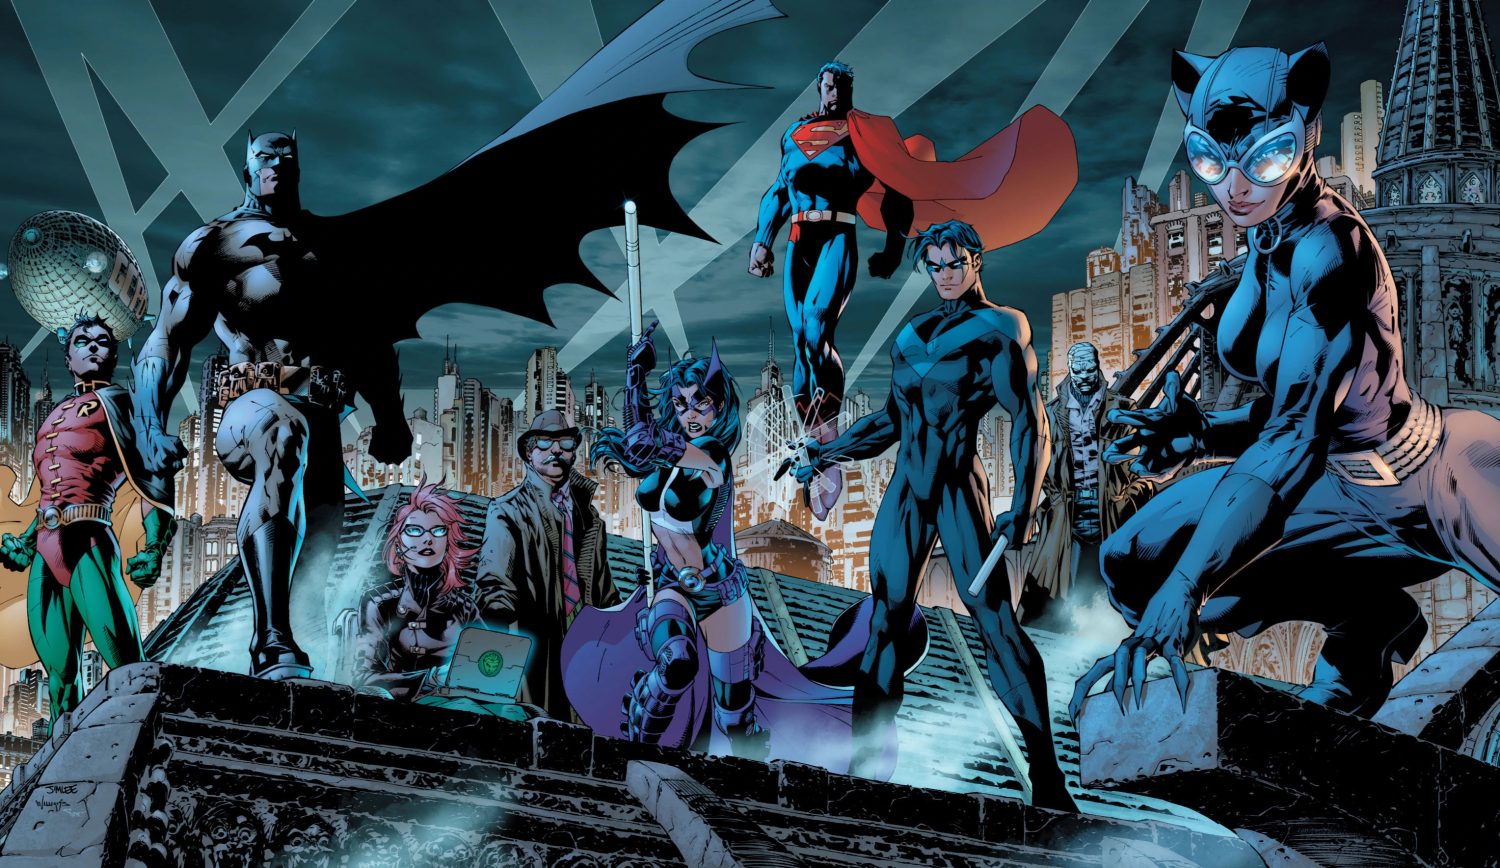 The Brave and the Bold Movie Will Explore a Side of Batman That's